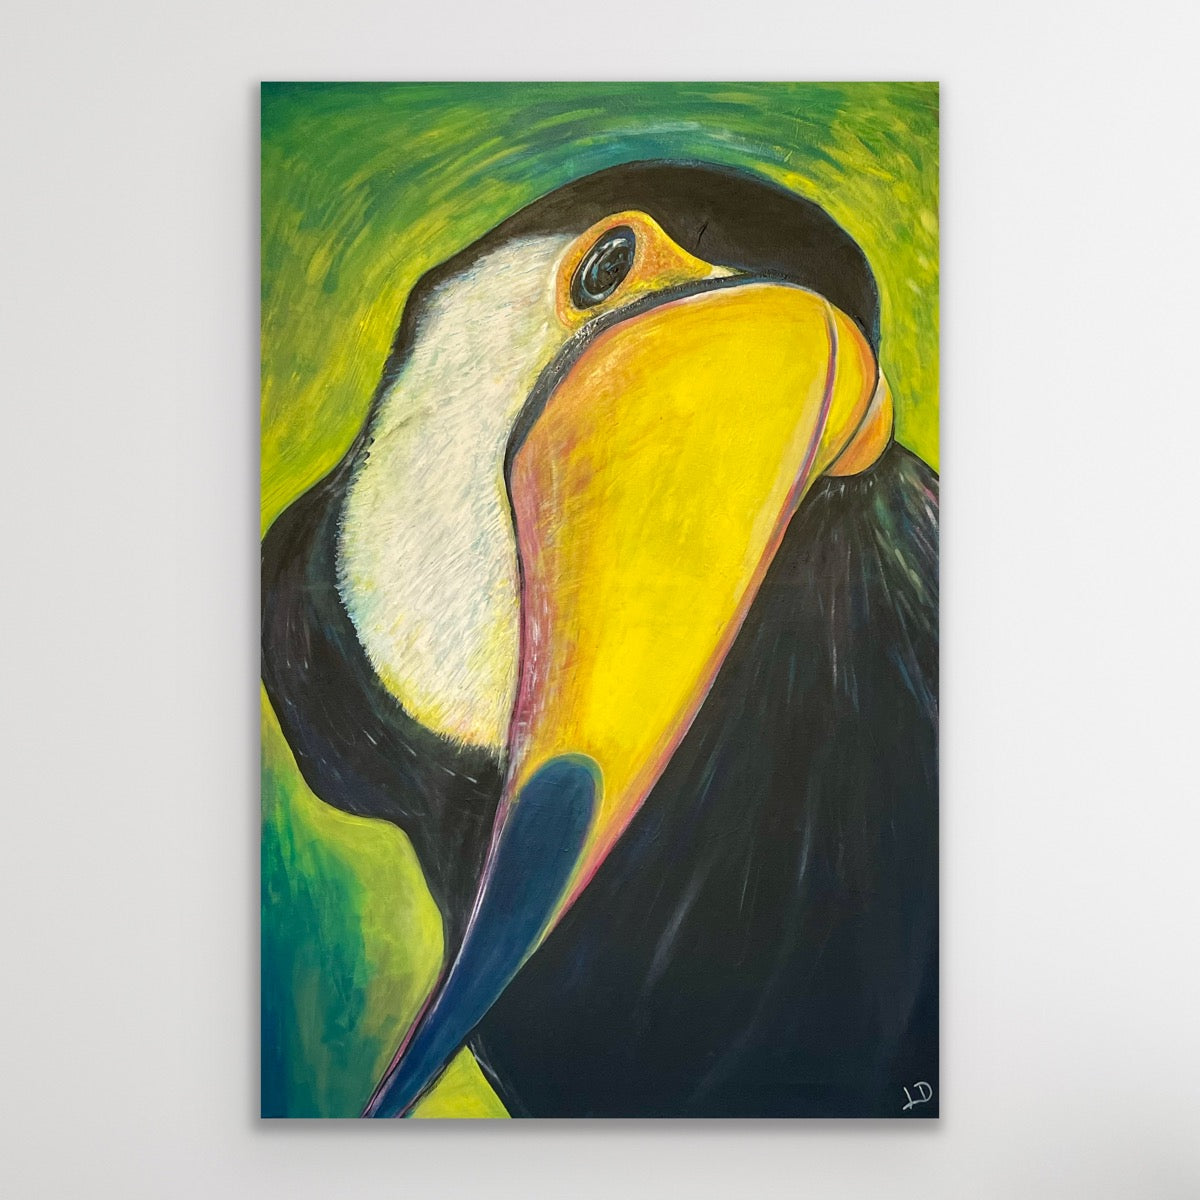 Toucan’s Delight - Gallery Wrapped canvas print